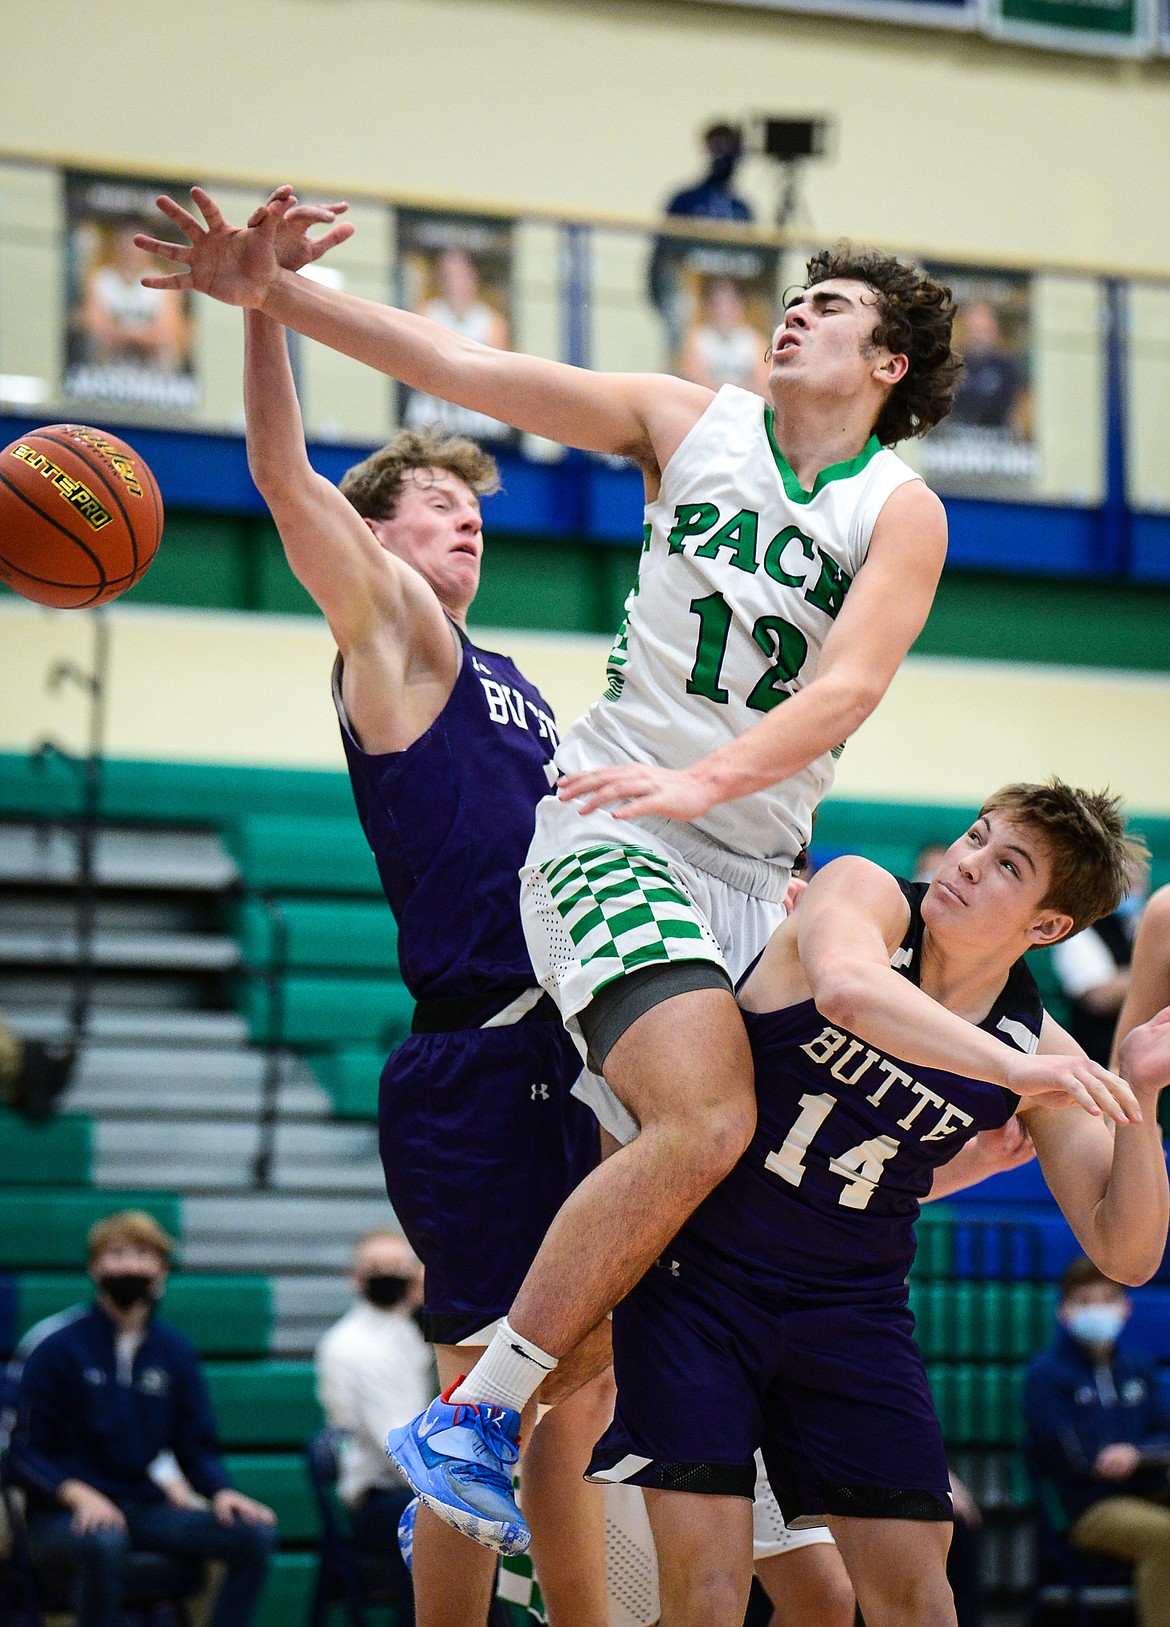 Glacier's Weston Price (12) is fouled on his way to the hoop in the third quarter against Butte at Glacier High School on Thursday. (Casey Kreider/Daily Inter Lake)